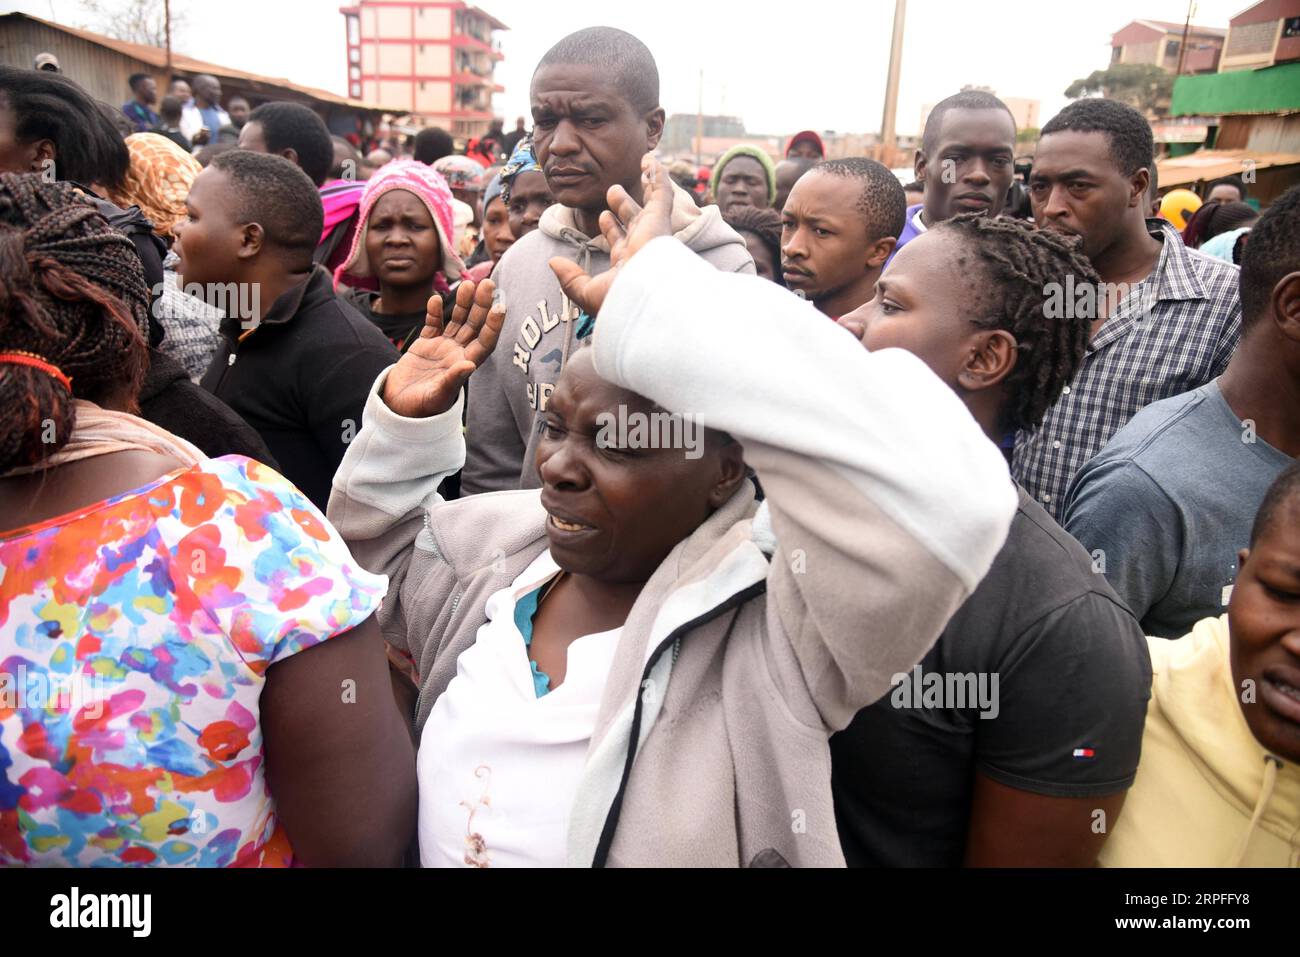 190923 -- NAIROBI, Sept. 23, 2019 Xinhua -- People gather at the scene where a classroom collapsed in Nairobi, capital of Kenya, on Sept. 23, 2019. At least seven pupils were killed and 59 others injured early Monday after their classroom collapsed at a school compound in Nairobi, government and charity officials said. Photo by John Okoyo/Xinhua KENYA-NAIROBI-CLASSROOM-COLLAPSE PUBLICATIONxNOTxINxCHN Stock Photo